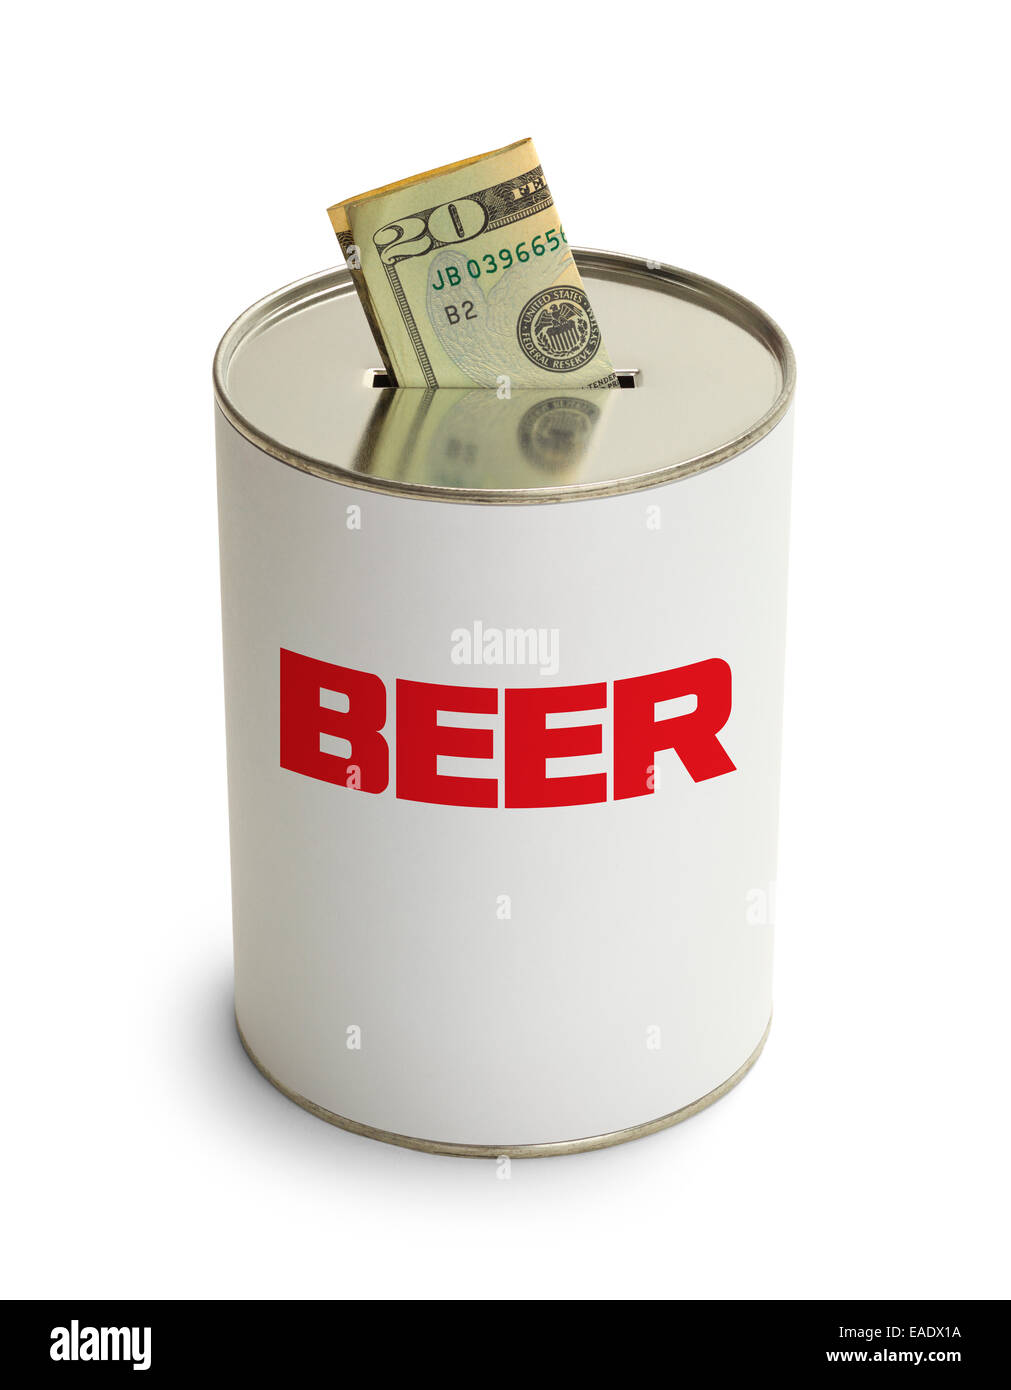 Beer Collection Can With Money Isolated on White Background. Stock Photo